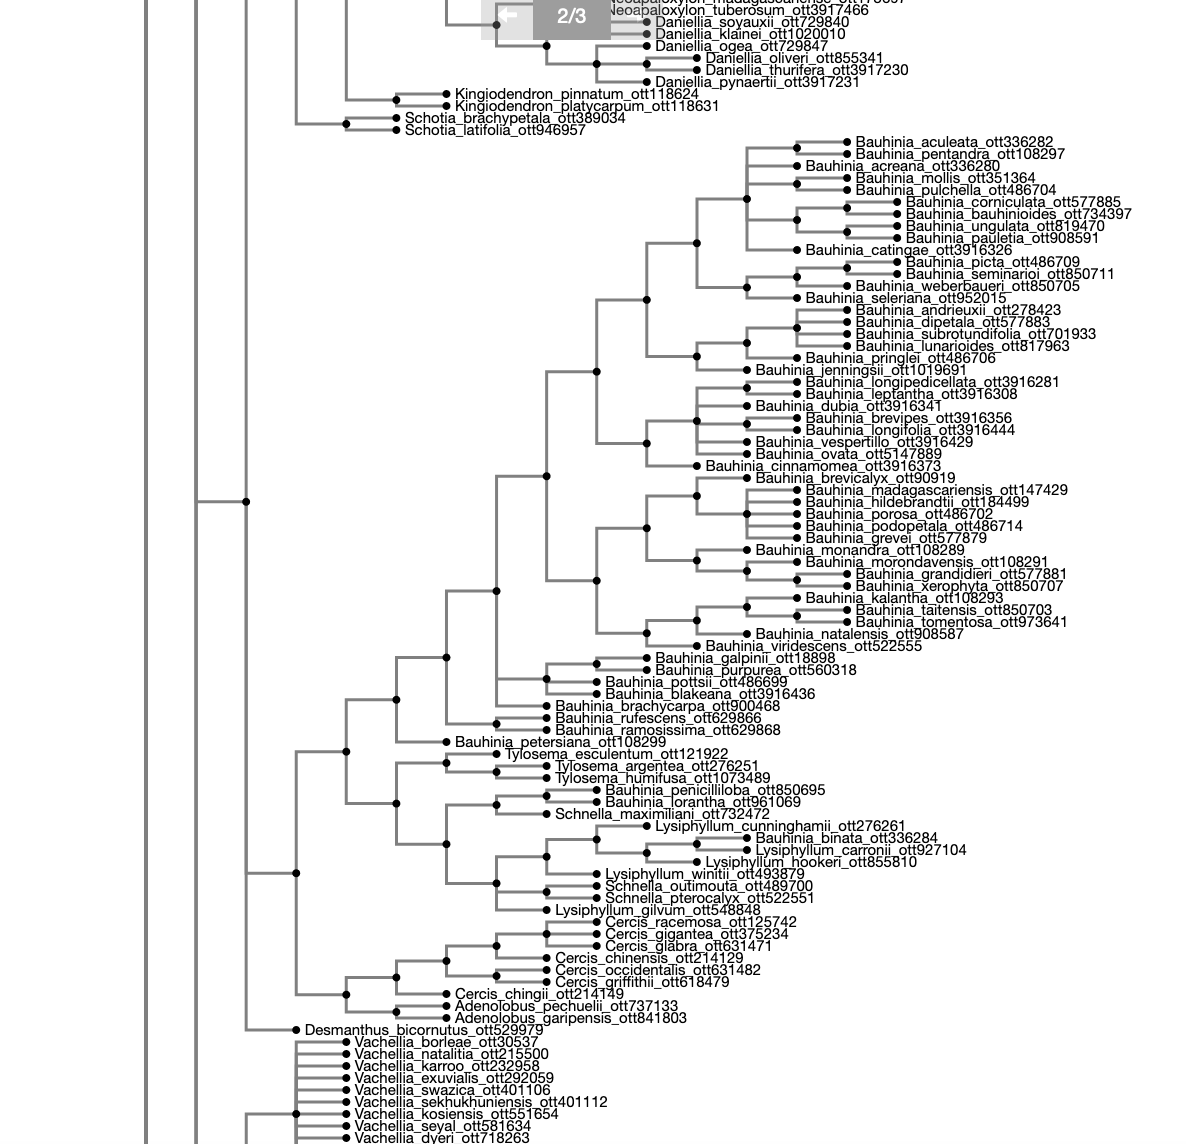 Section of the 4,835 terminal Legume OToL (v. Dec 2019; phylogenies only), rendered on phylo.io